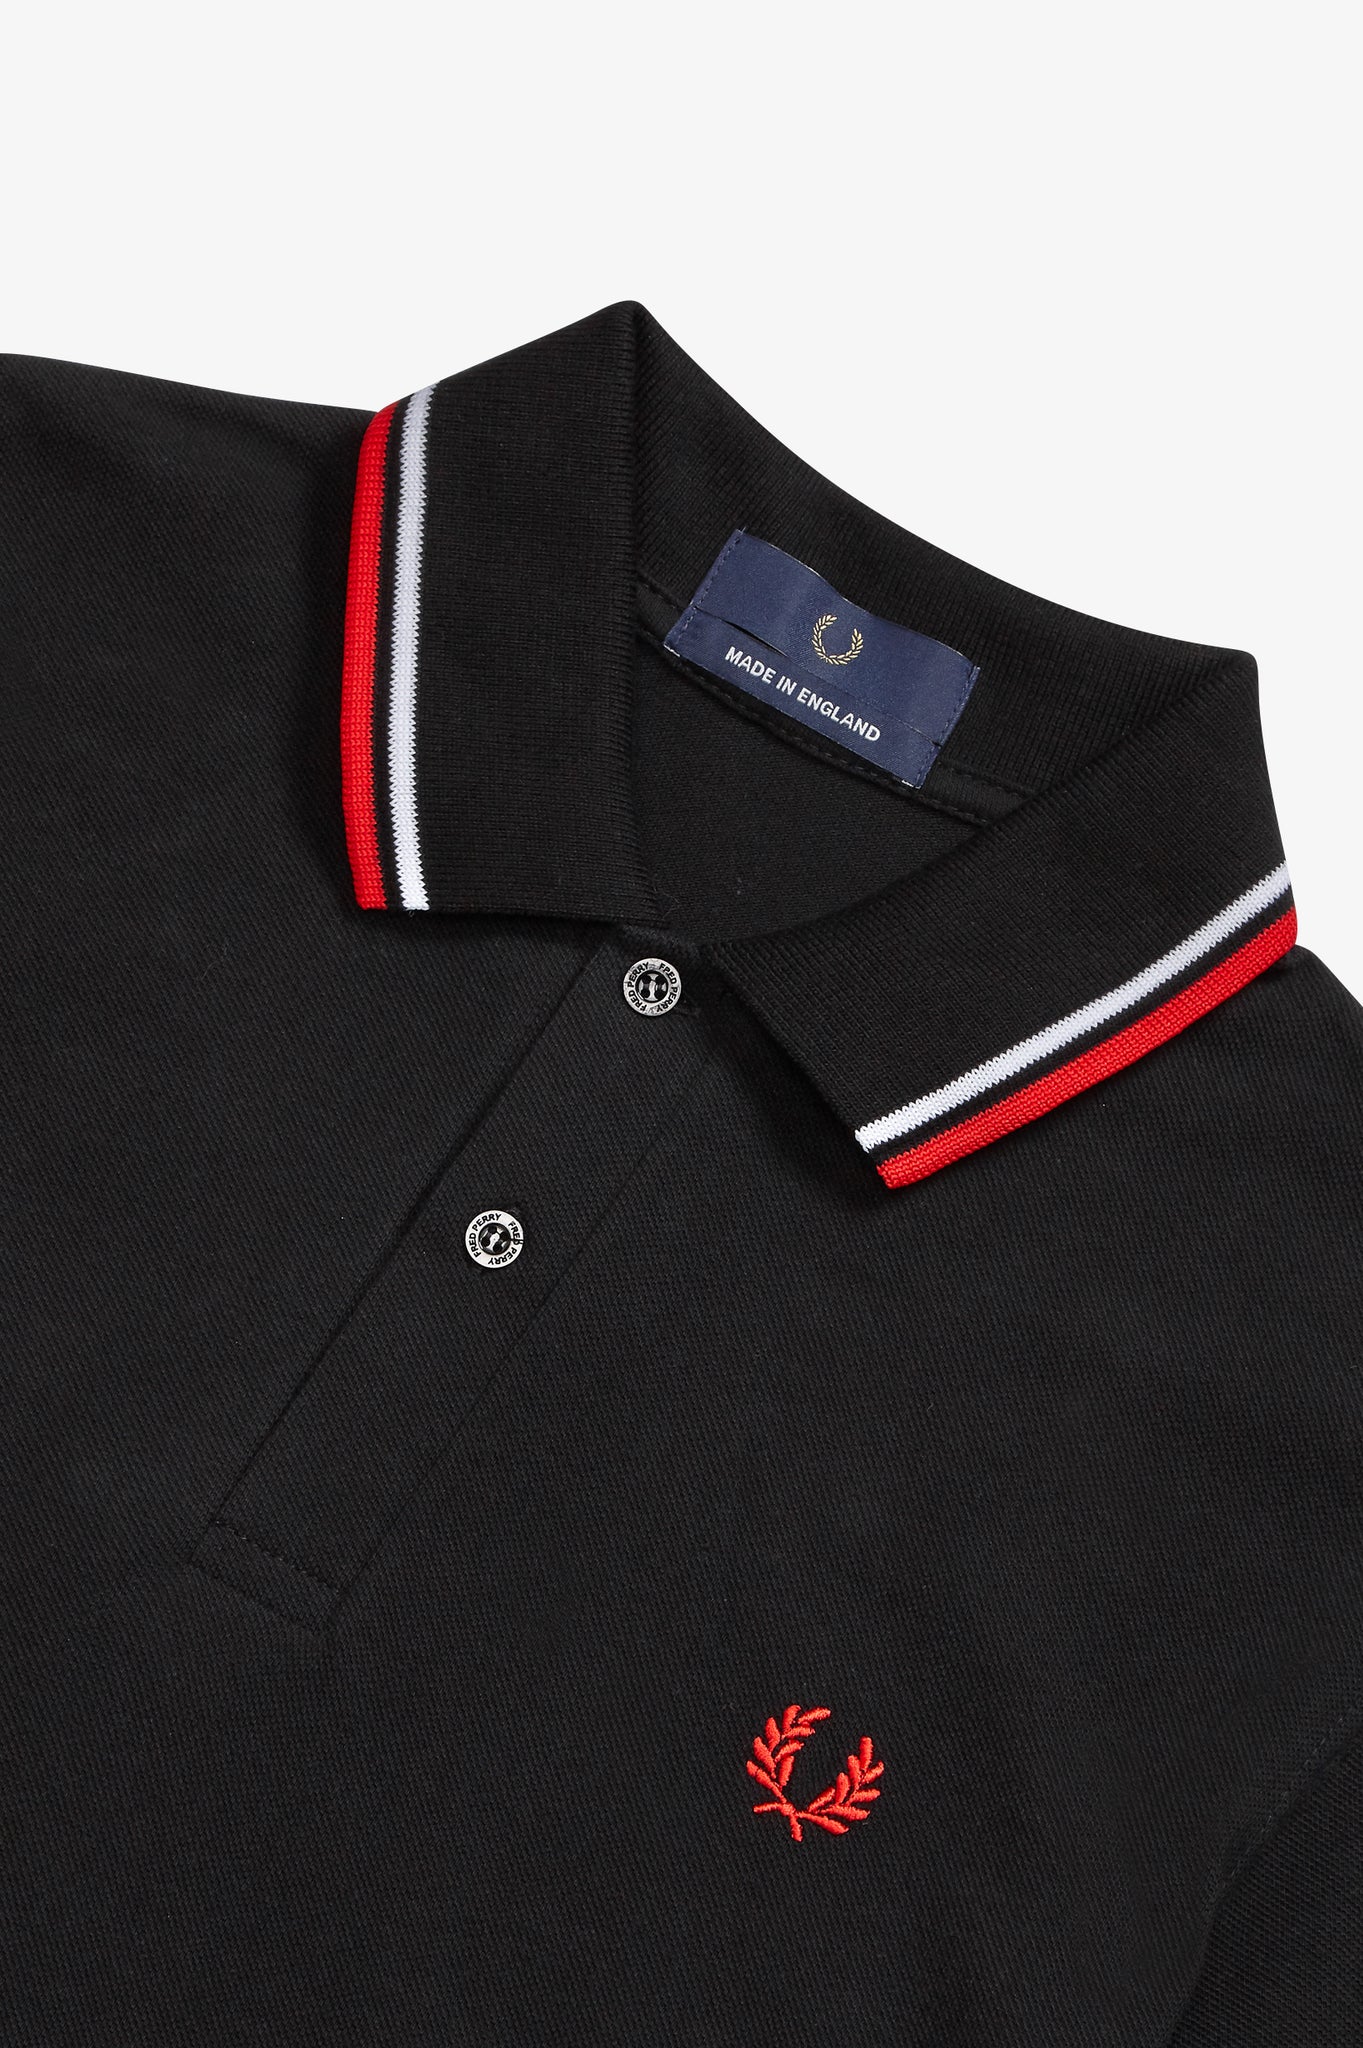 fred perry polo black red